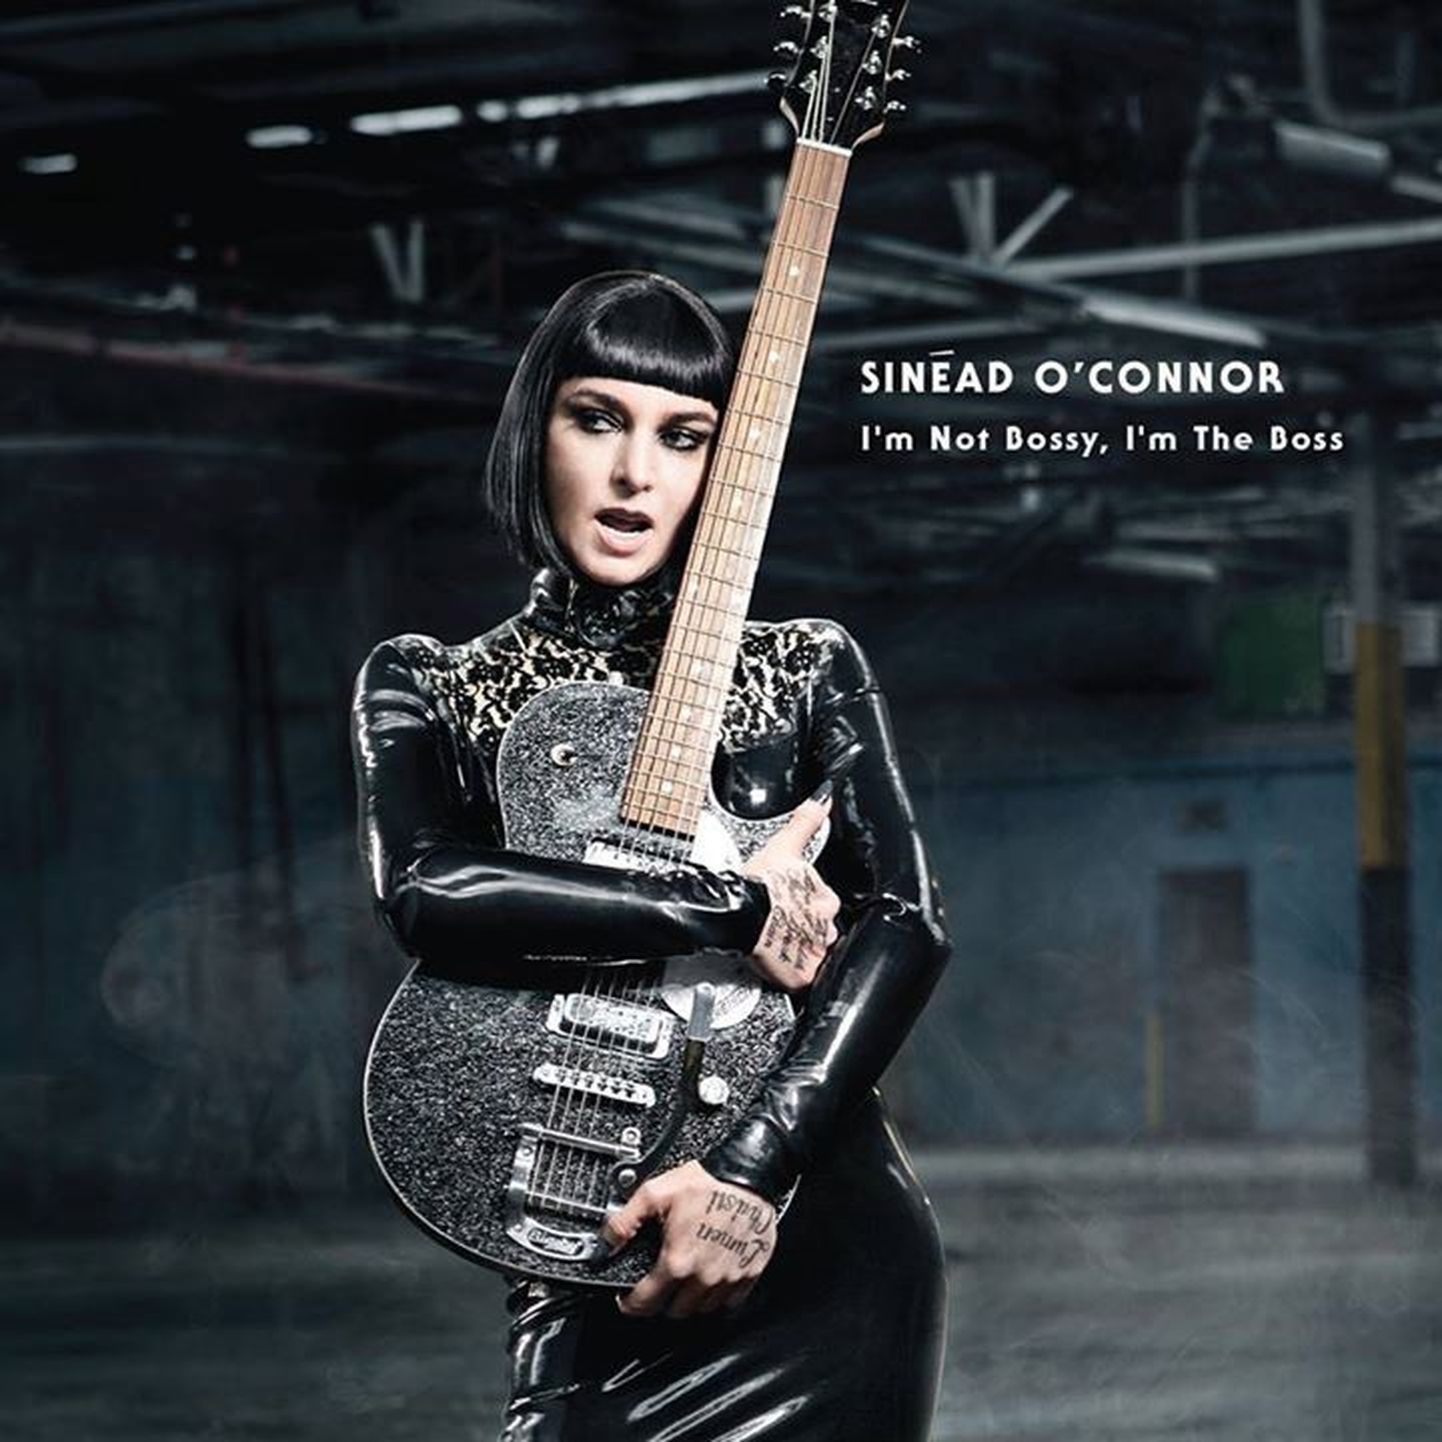 Sinead O'Connor albumi «I'm Not Bossy, I'm the Boss» kaanel